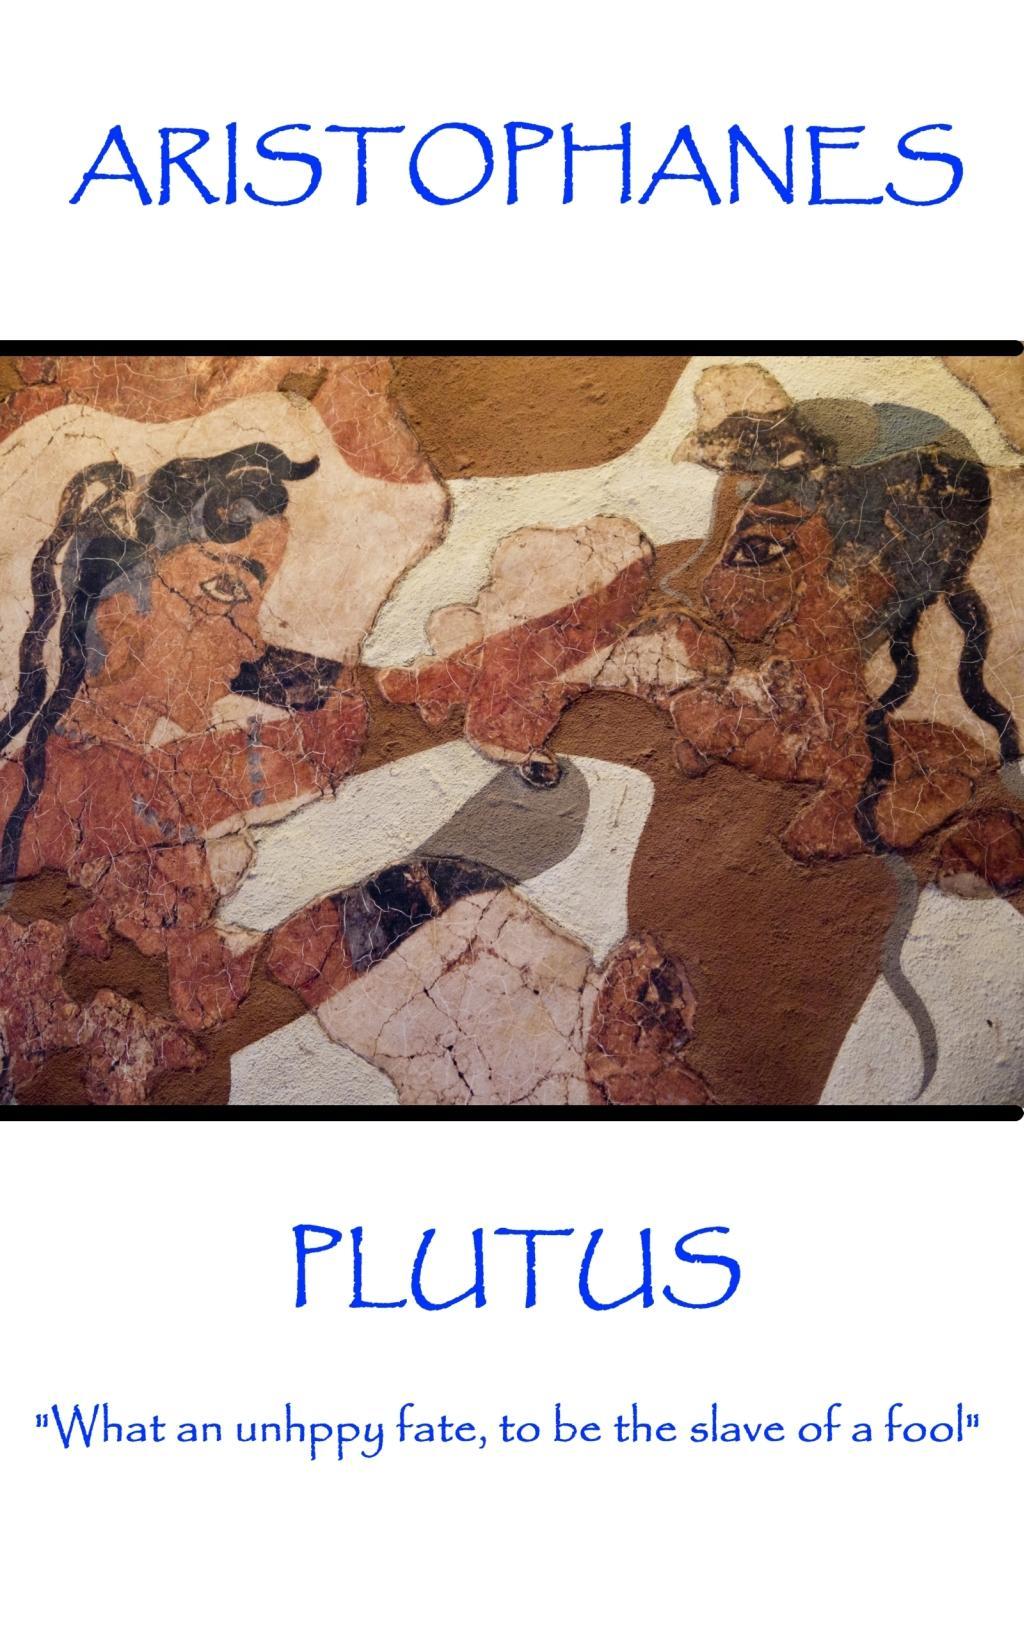 Aristophanes - Plutus: "What an unhppy fate, to be the slave of a fool"